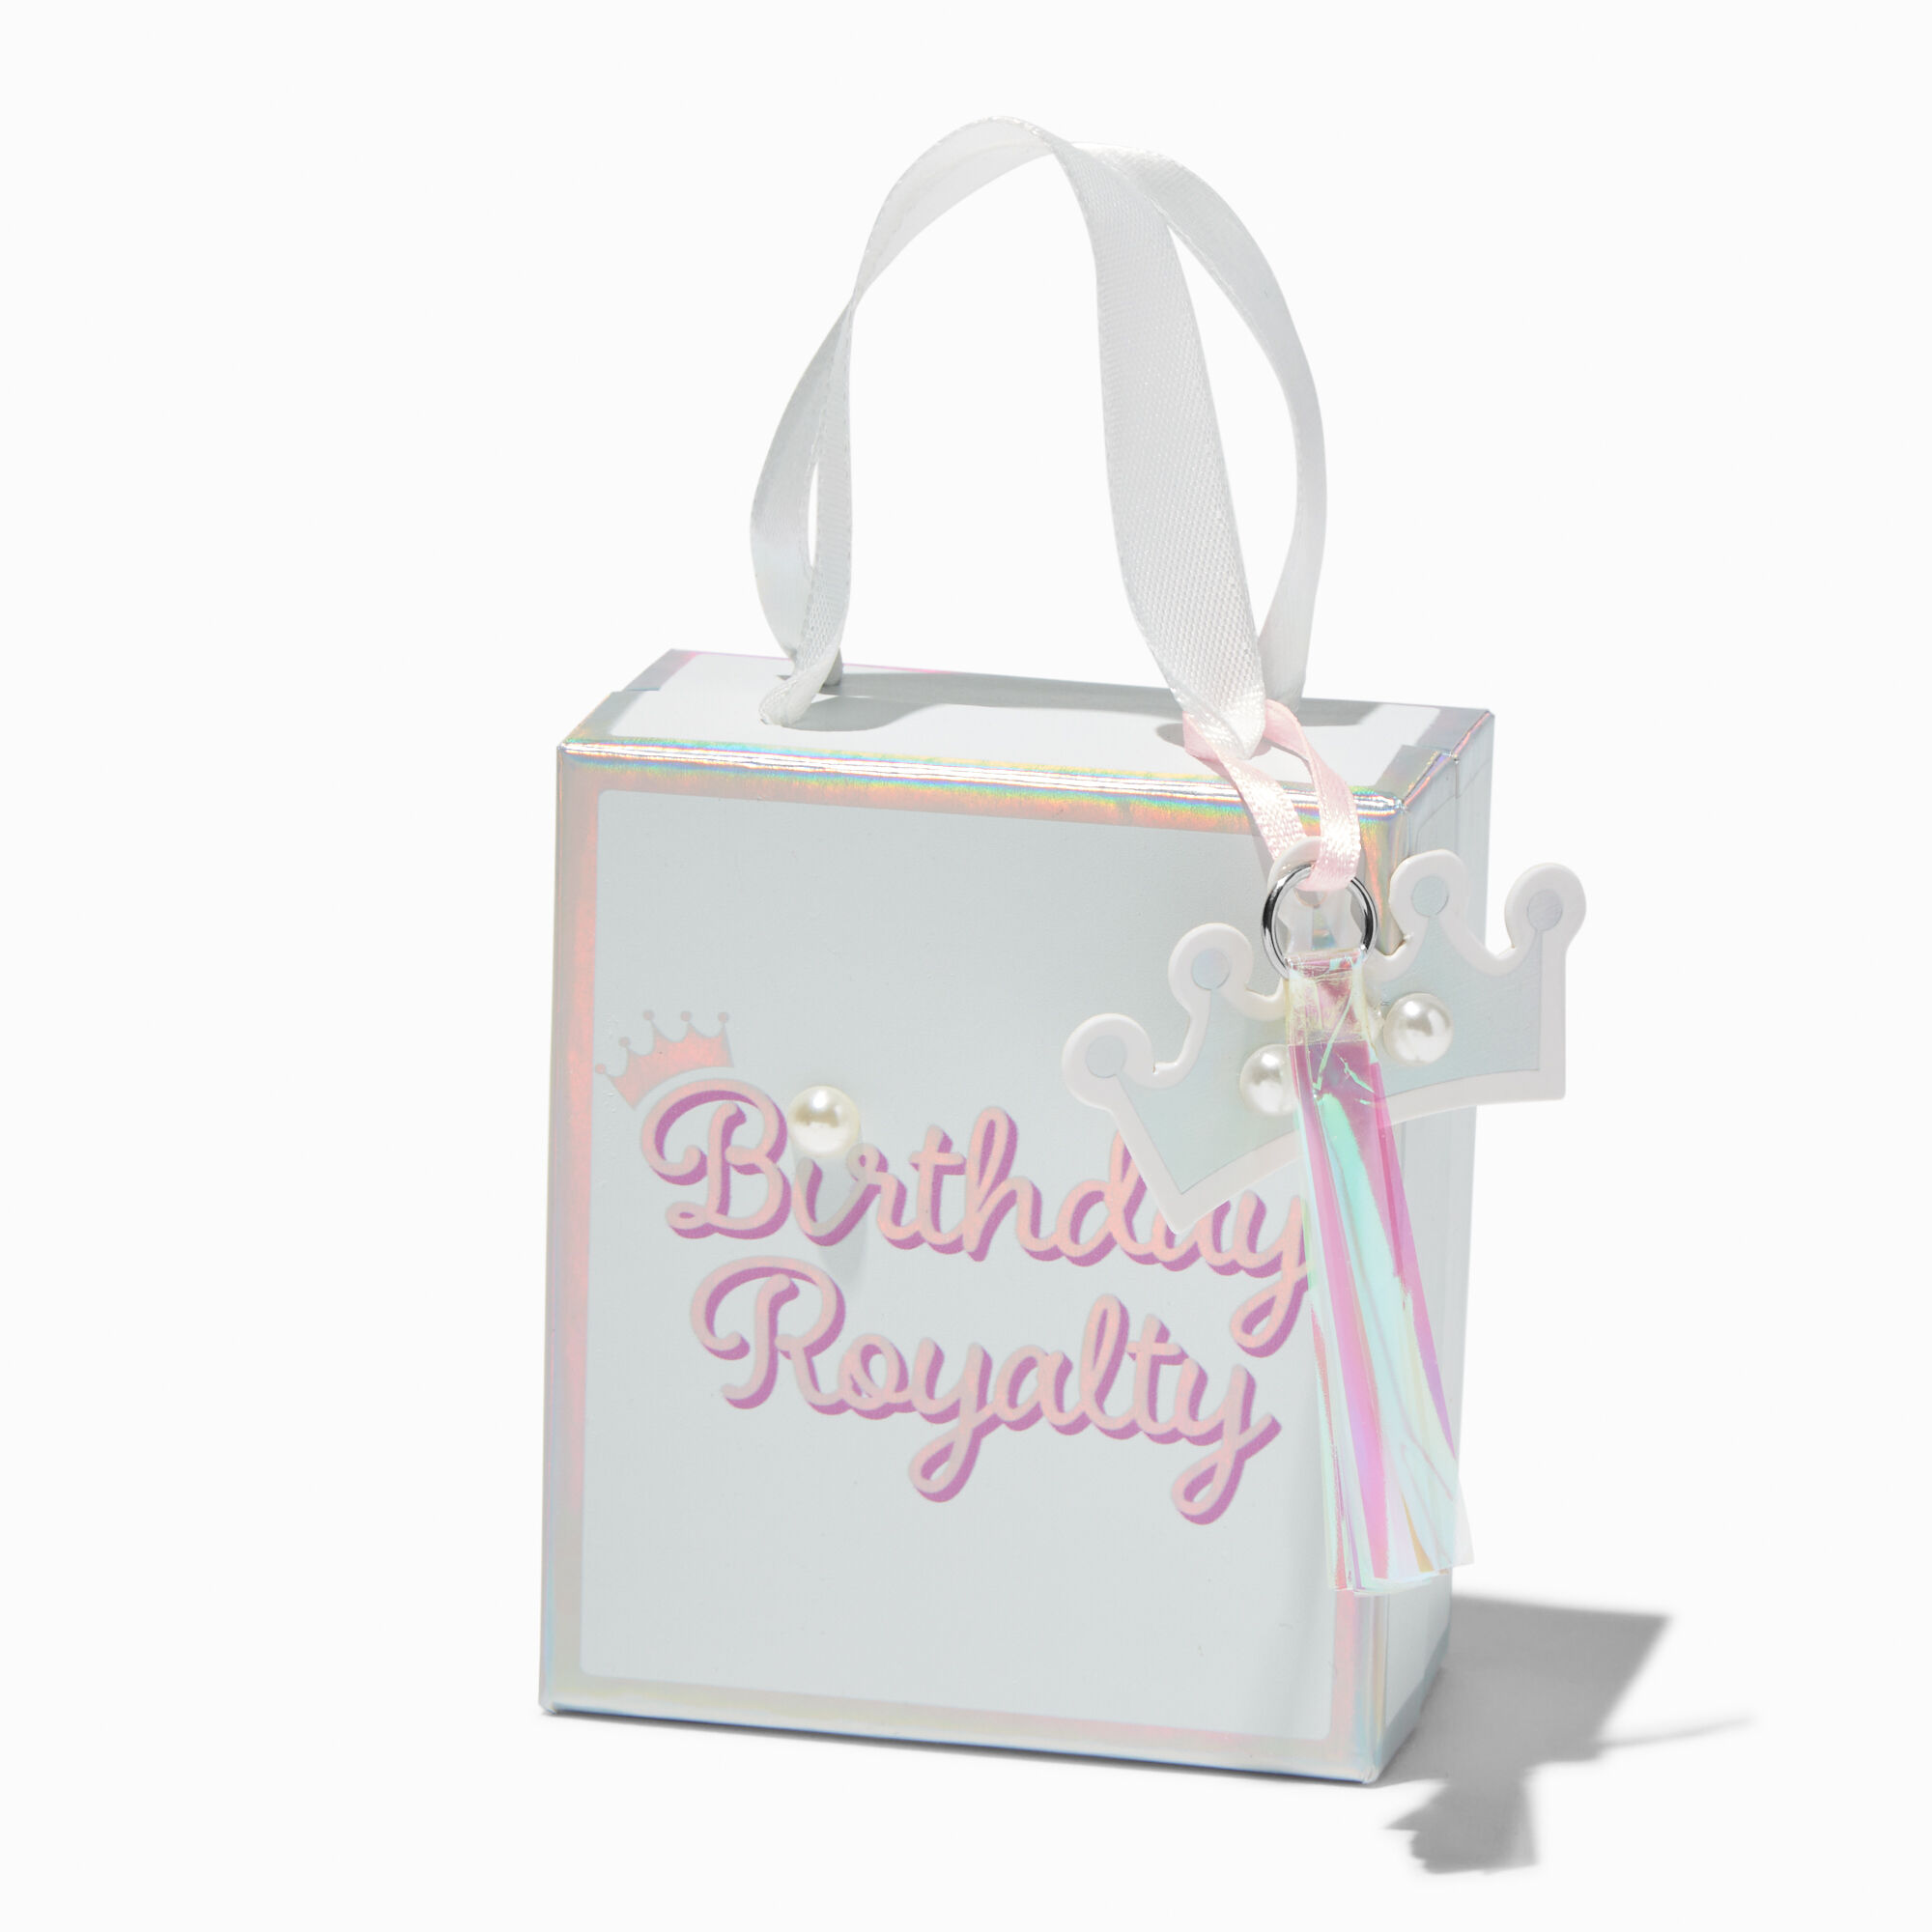 View Claires birthday Royalty Small Gift Box information